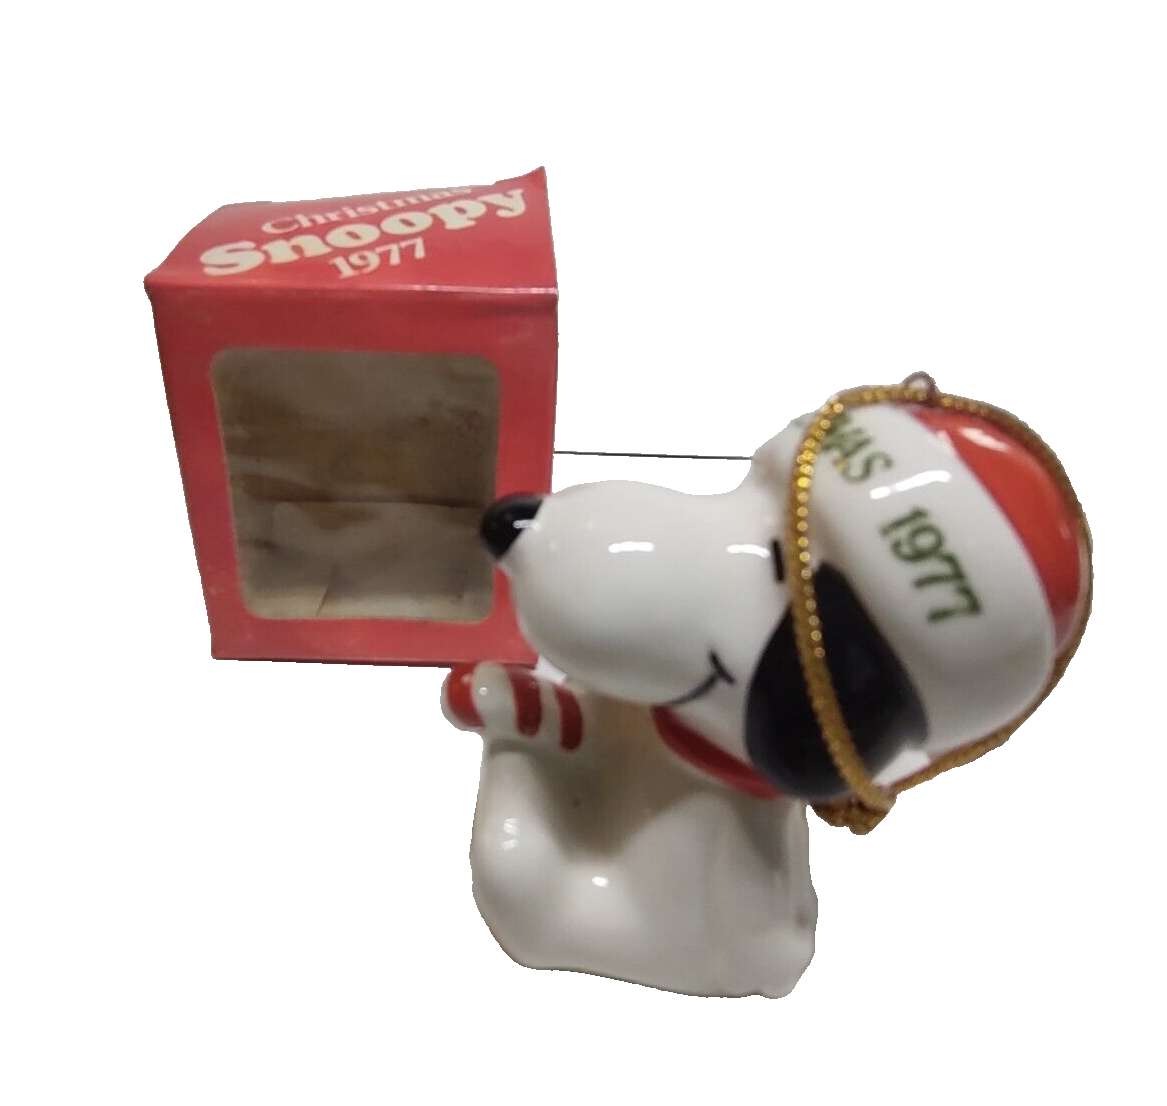 Snoopy Christmas Ornament 1977 Peanuts Gang Porcelain Candy Cane Dog With Box - $14.54